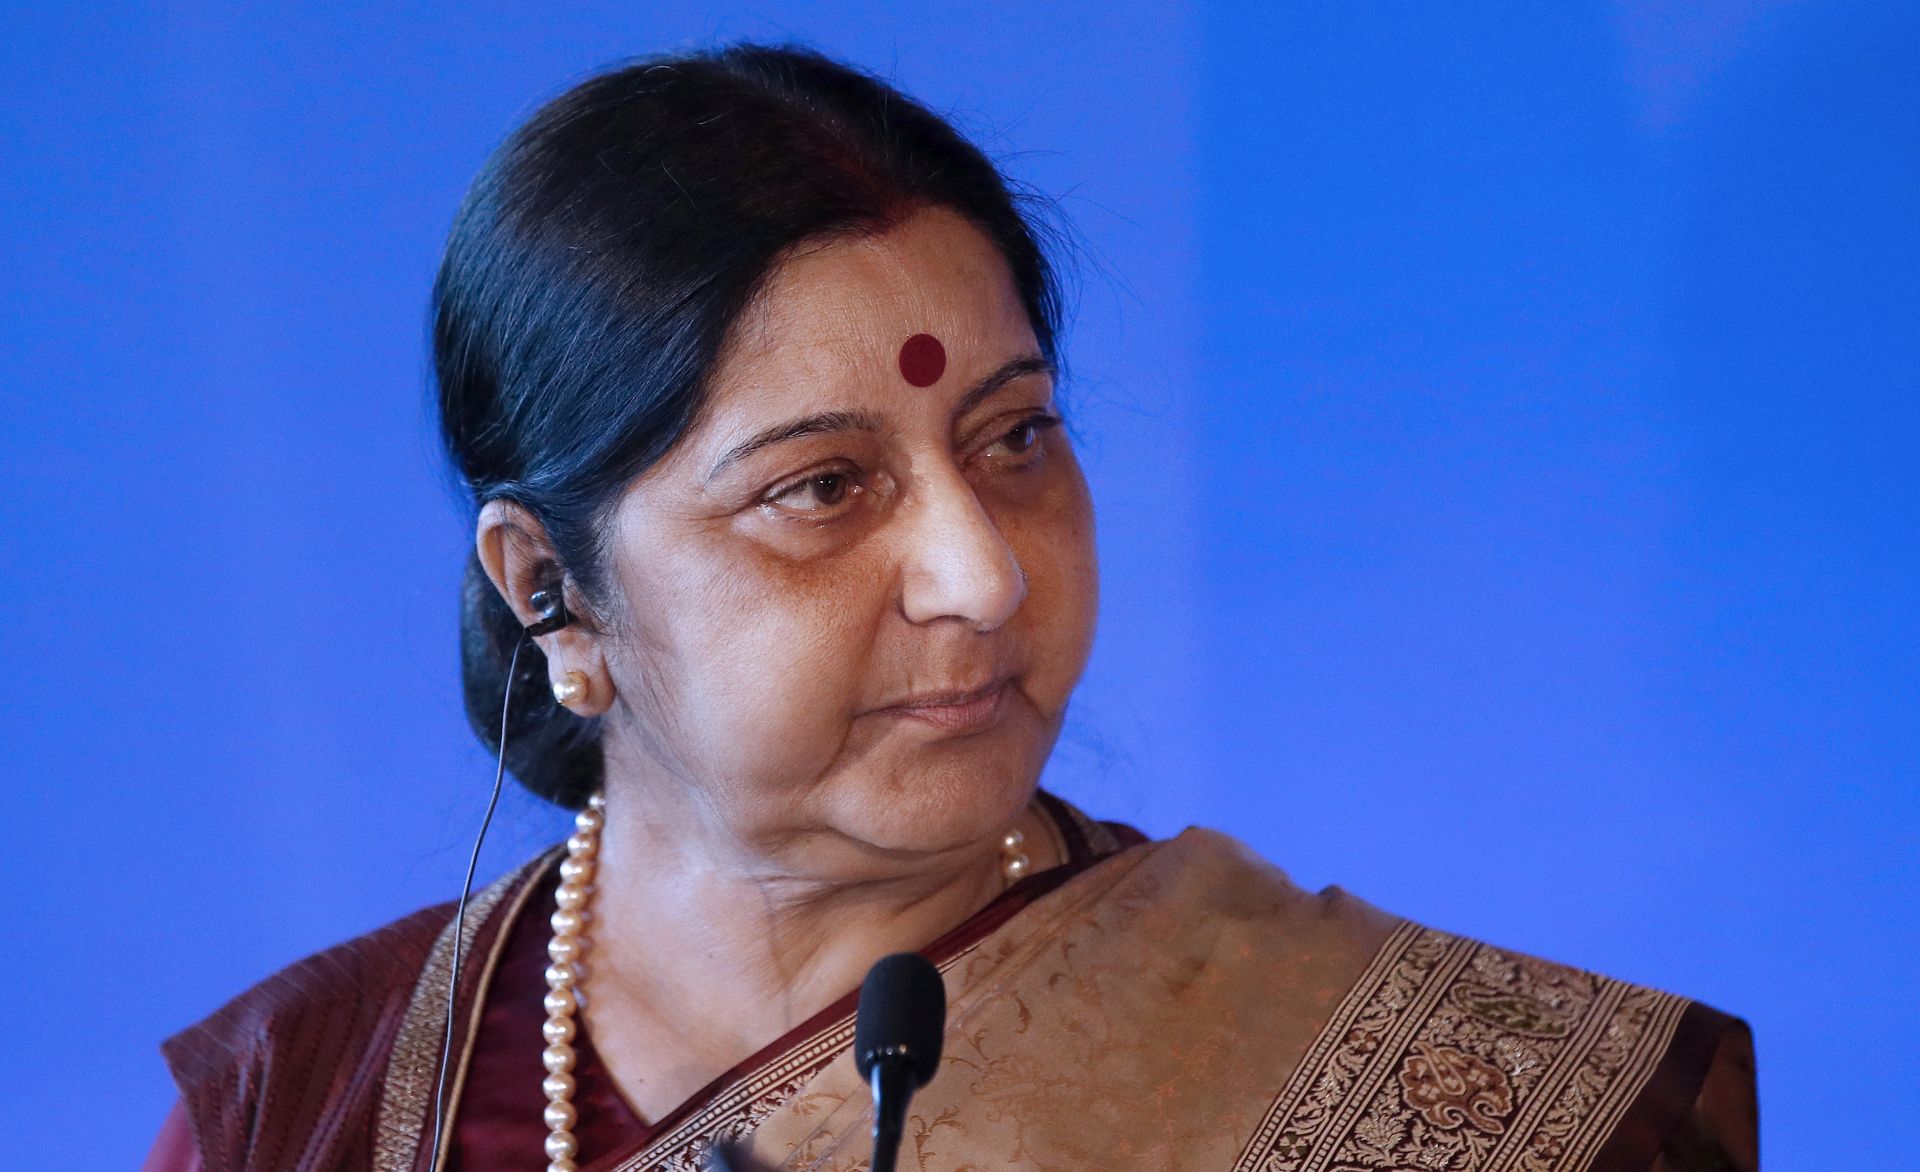 epa07760097 (FILE) - Indian Foreign Affairs Minister Sushma Swaraj makes a statement following her meeting with French Minister for Foreign Affairs Jean Yves Le Drian (unseen) at Quai d'Orsay in Paris, France, 18 June 2018, reissued 07 August 2019. Media reports on 07 August 2019 state that 67 year old Sushma Swaraj died on 06 August after suffering a massive heart attack and her last rites will be performed in New Delhi.    *** Local Caption *** 54419996  EPA/YOAN VALAT *** Local Caption *** 54419996